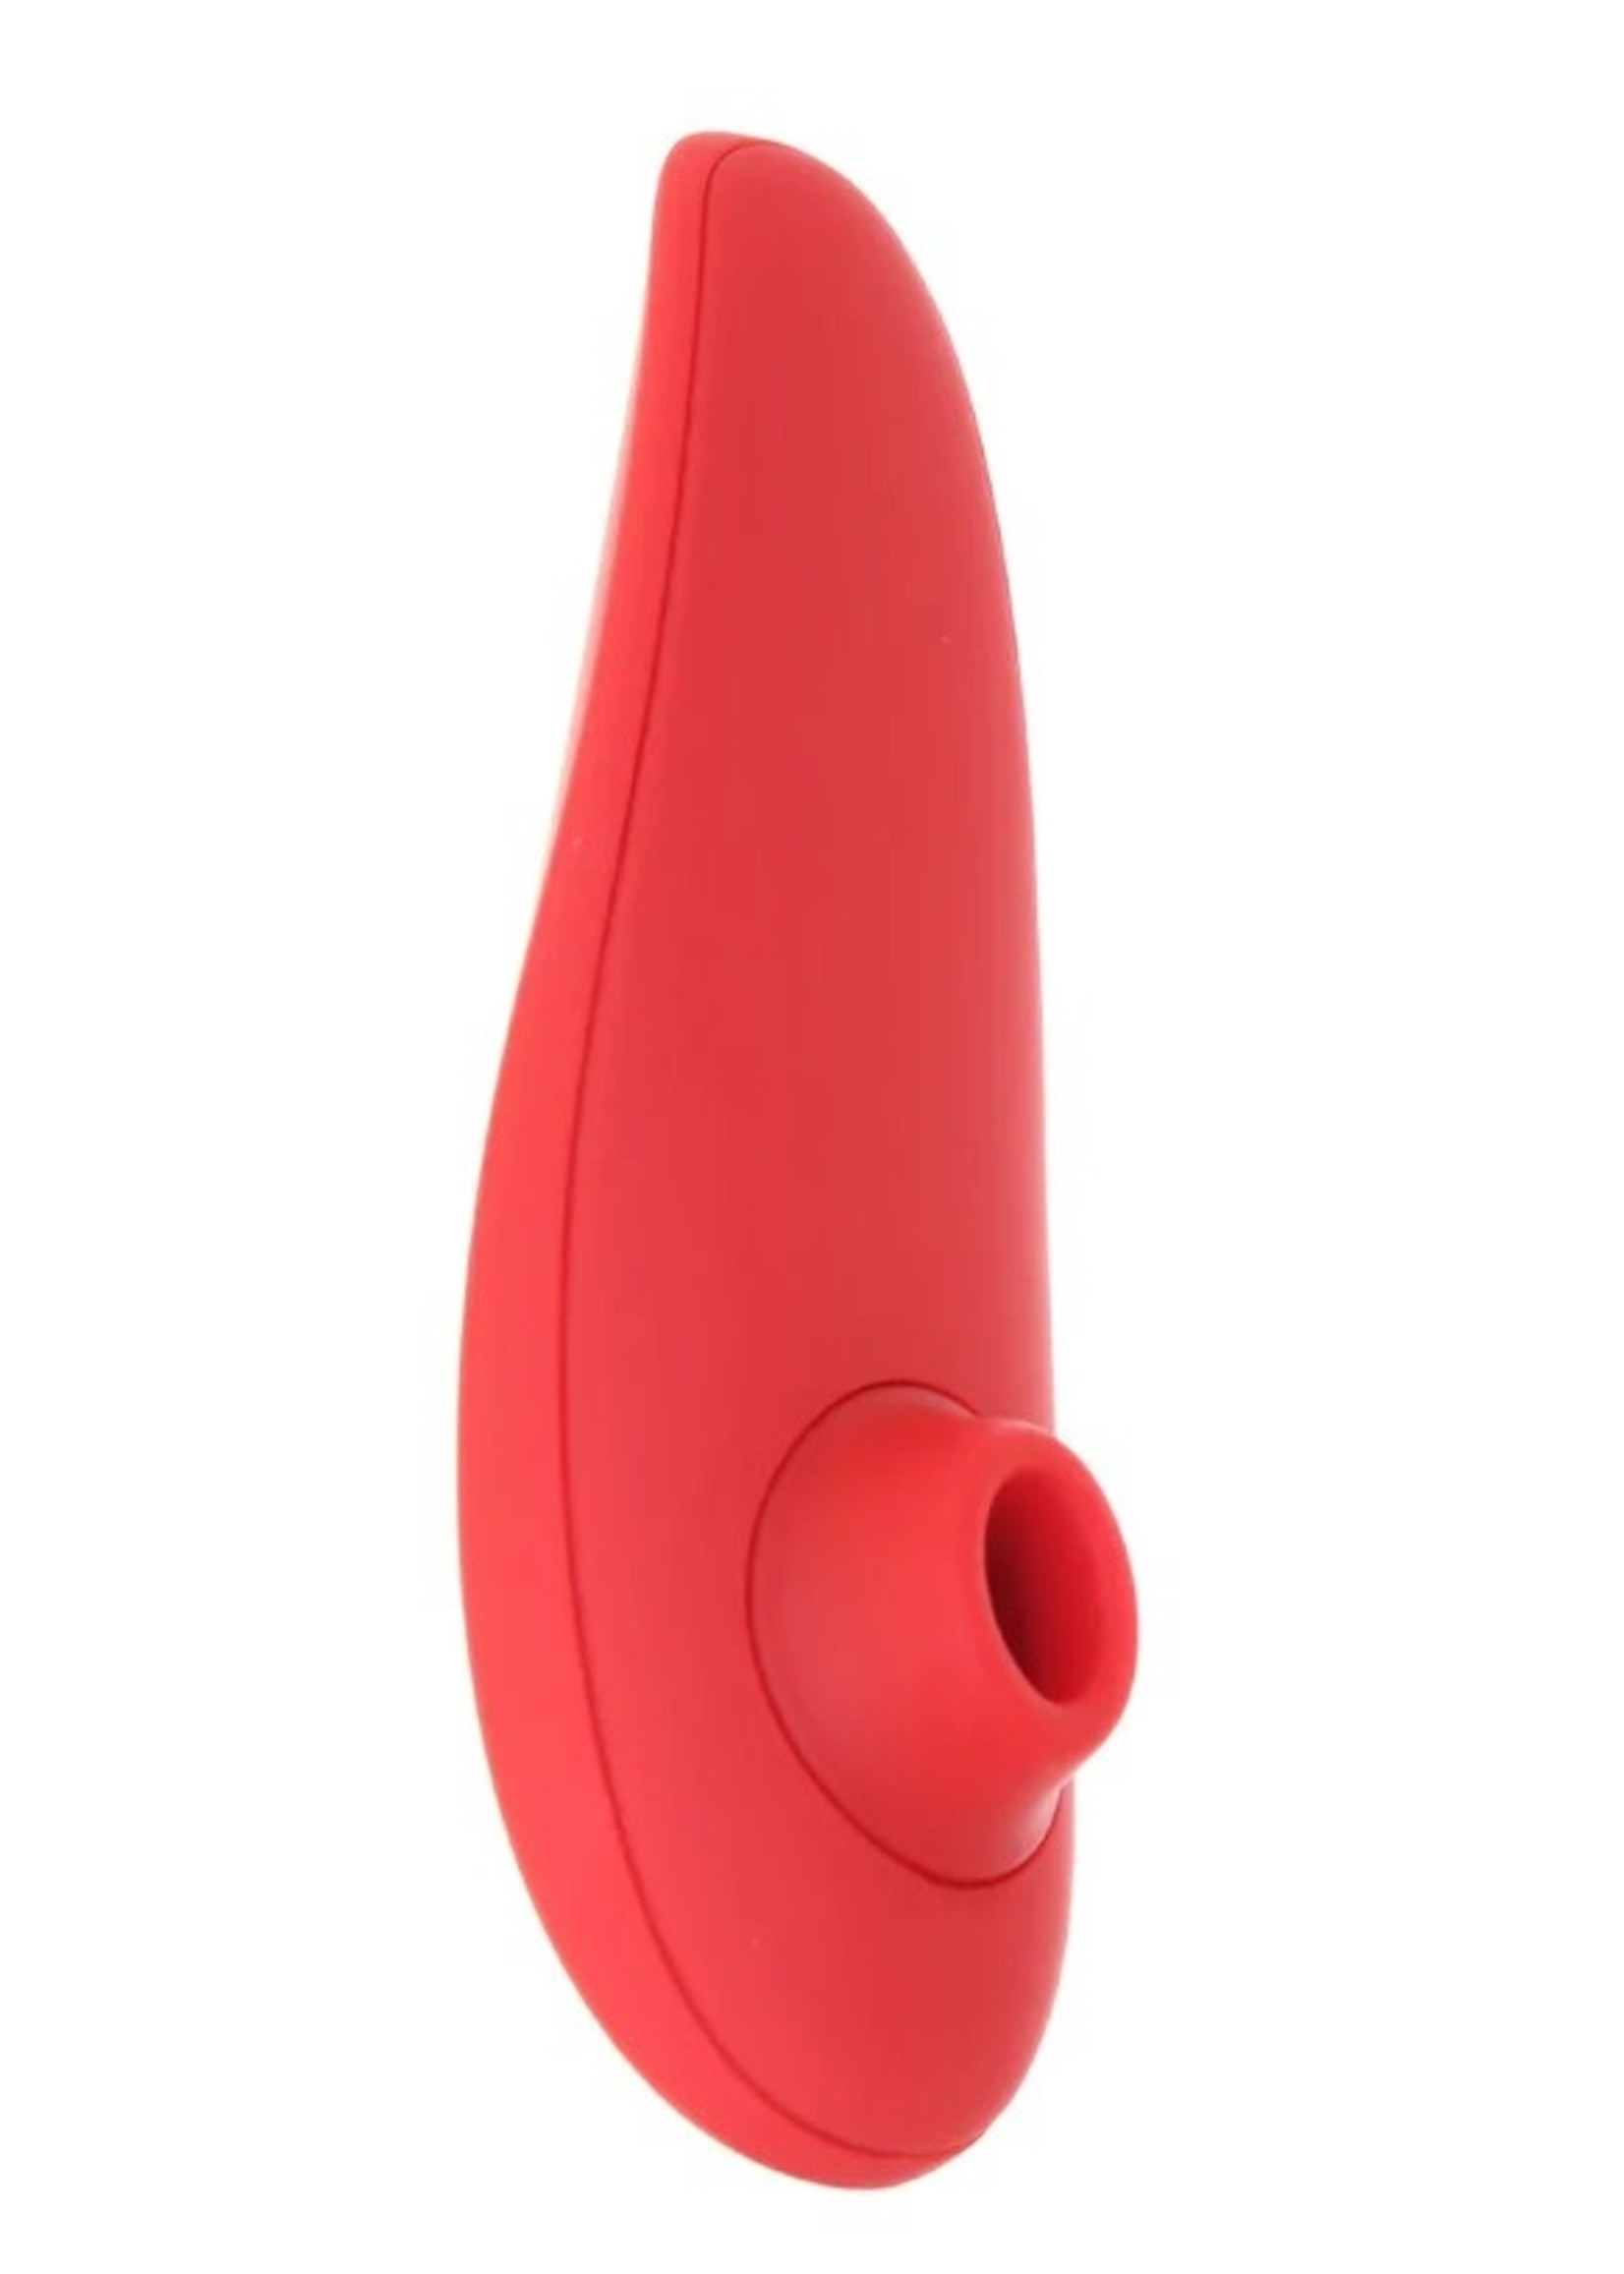 Womanizer Marilyn Monroe Special Edition in Vivid Red